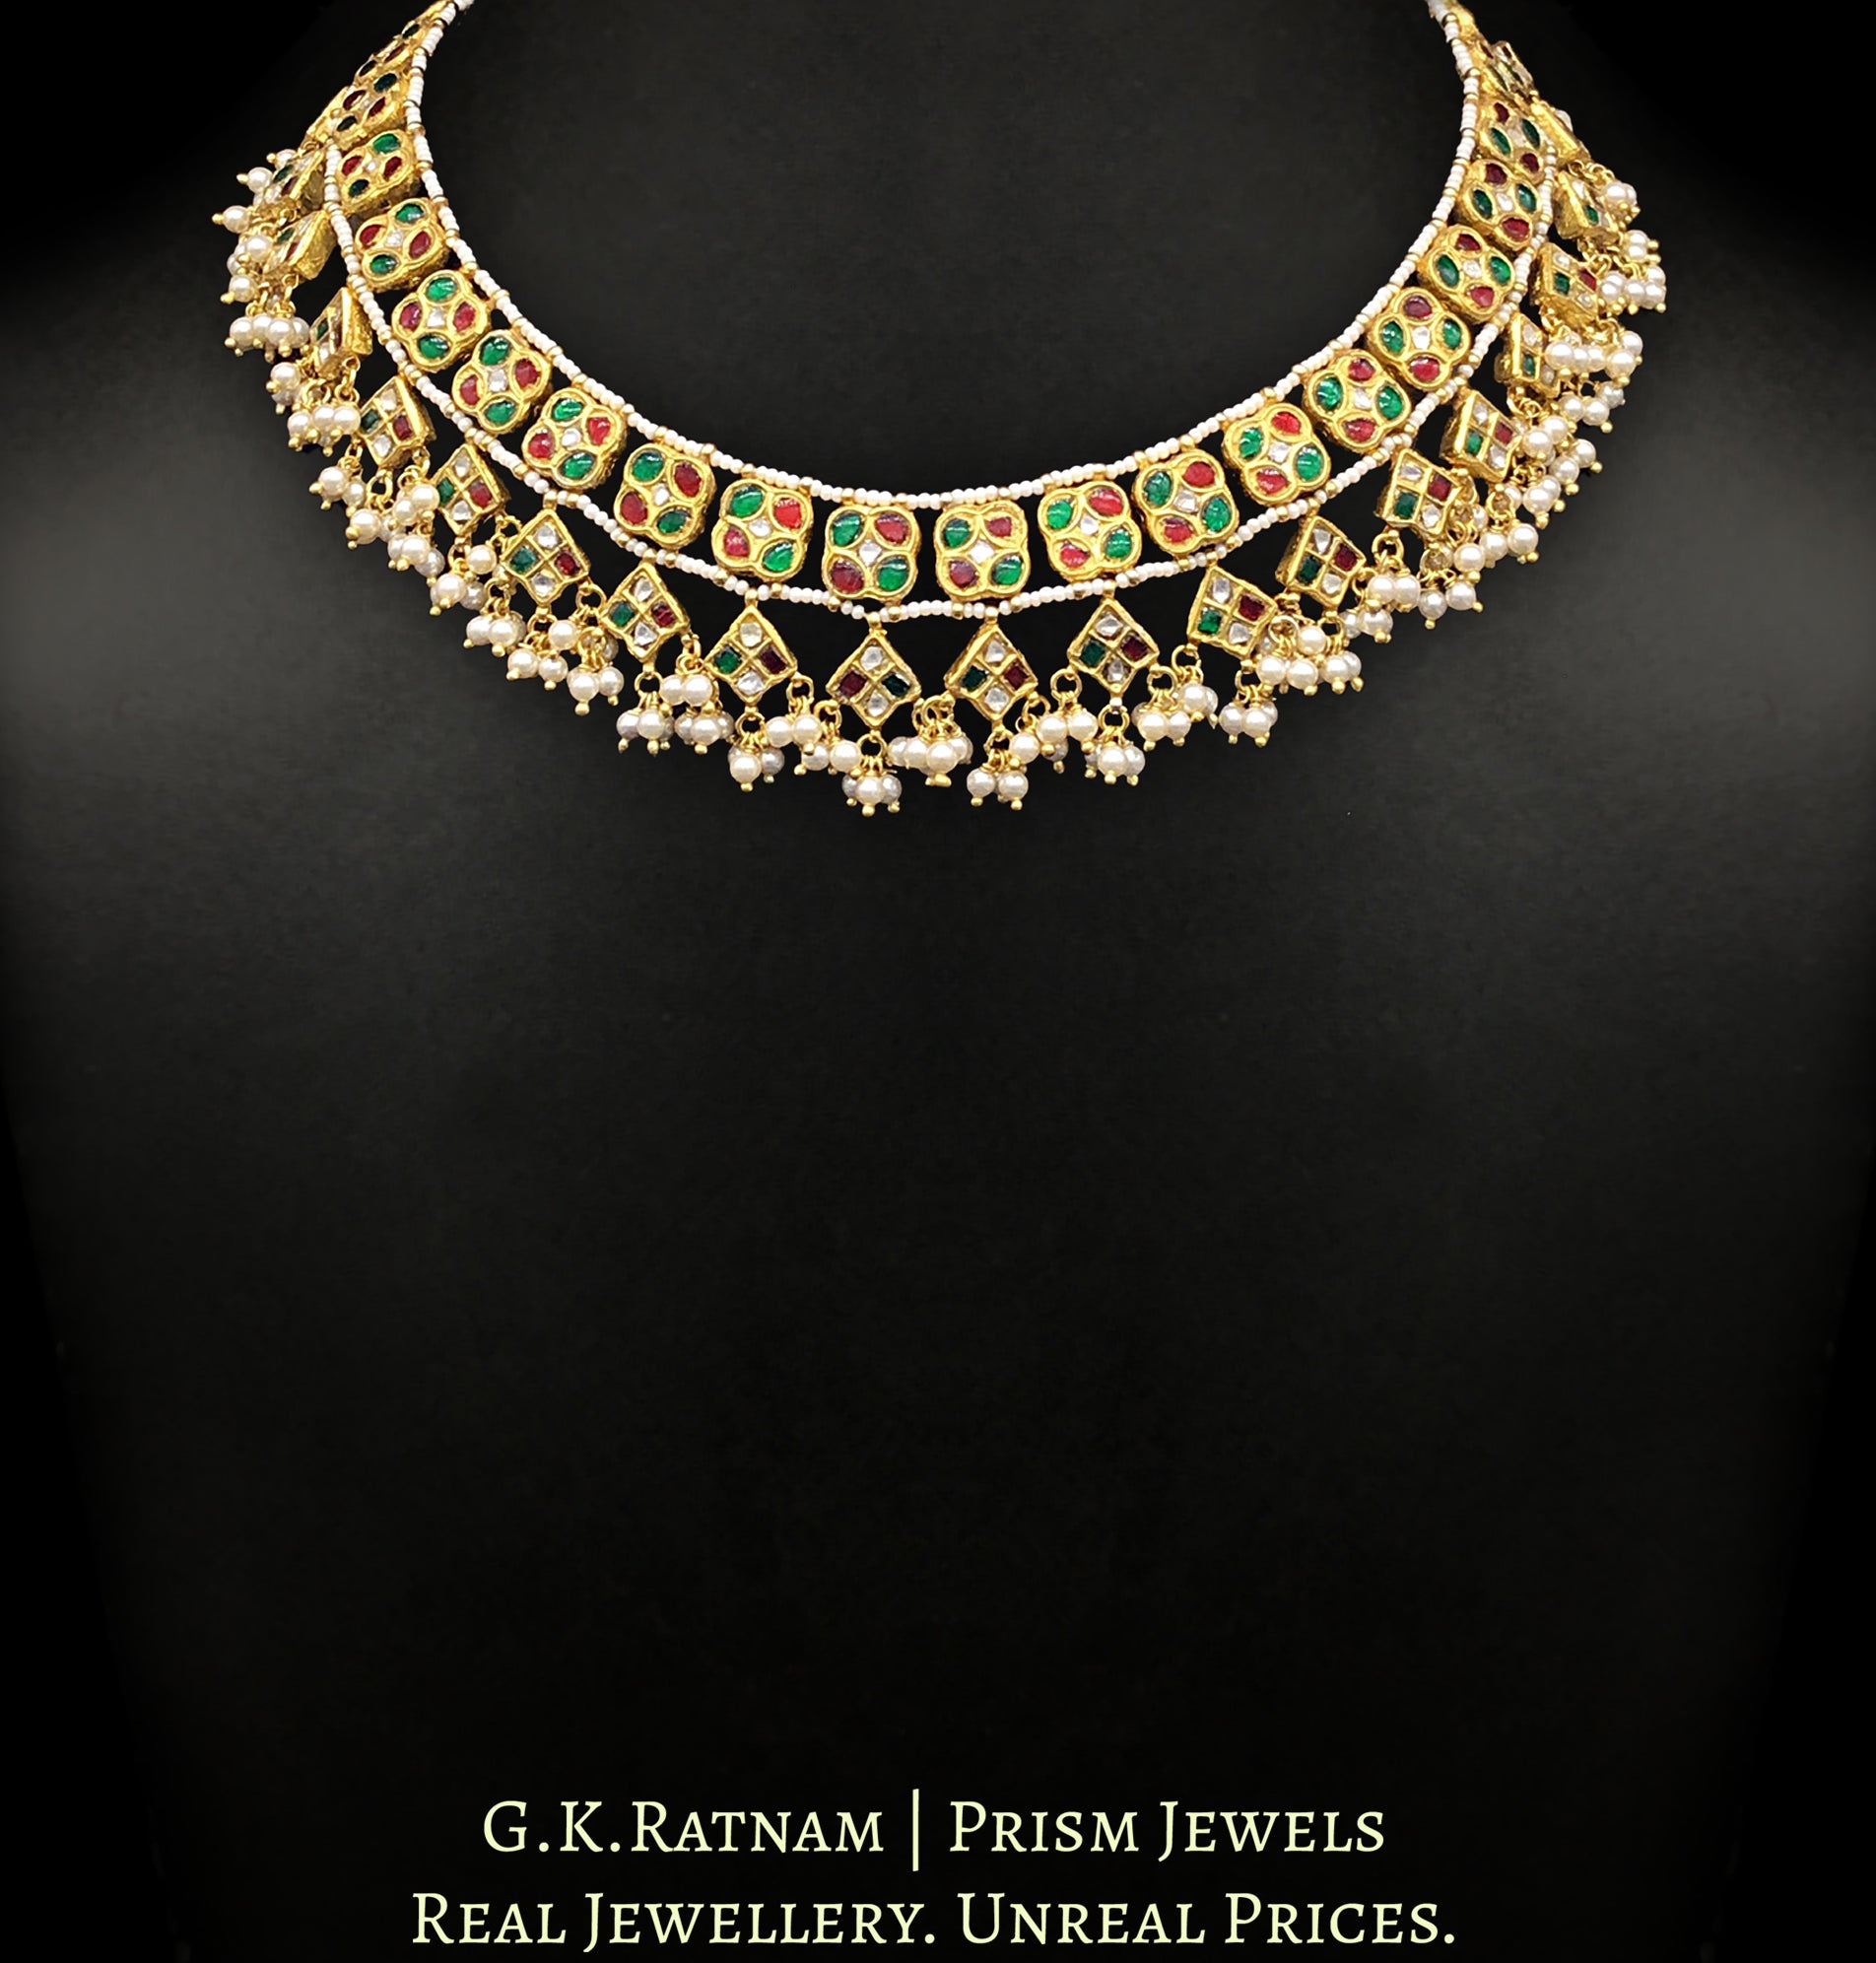 23k Gold and Diamond Polki Necklace set with ruby-red and emerald-green stones